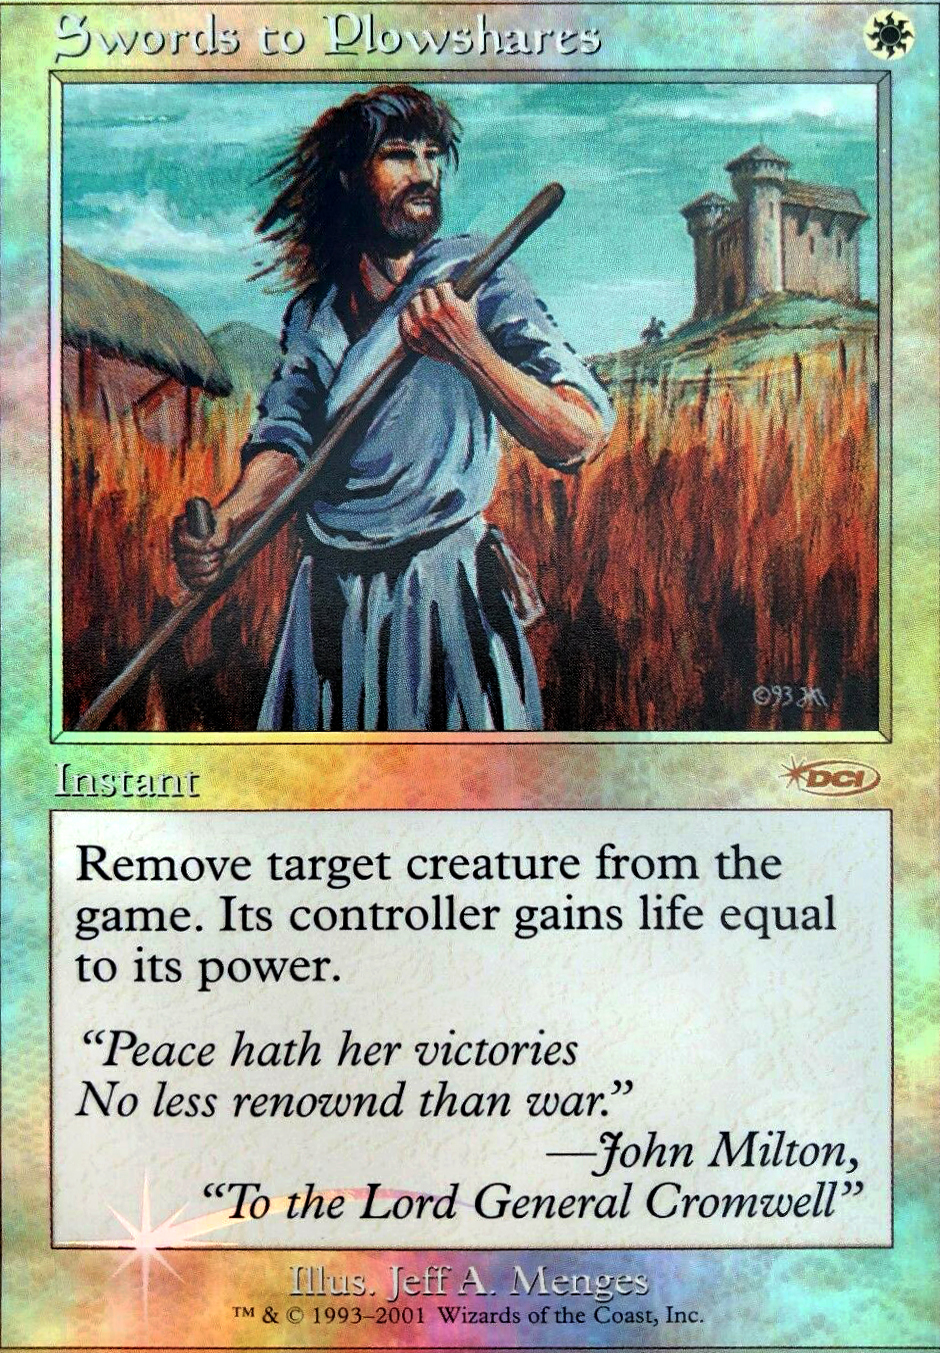 Featured card: Swords to Plowshares